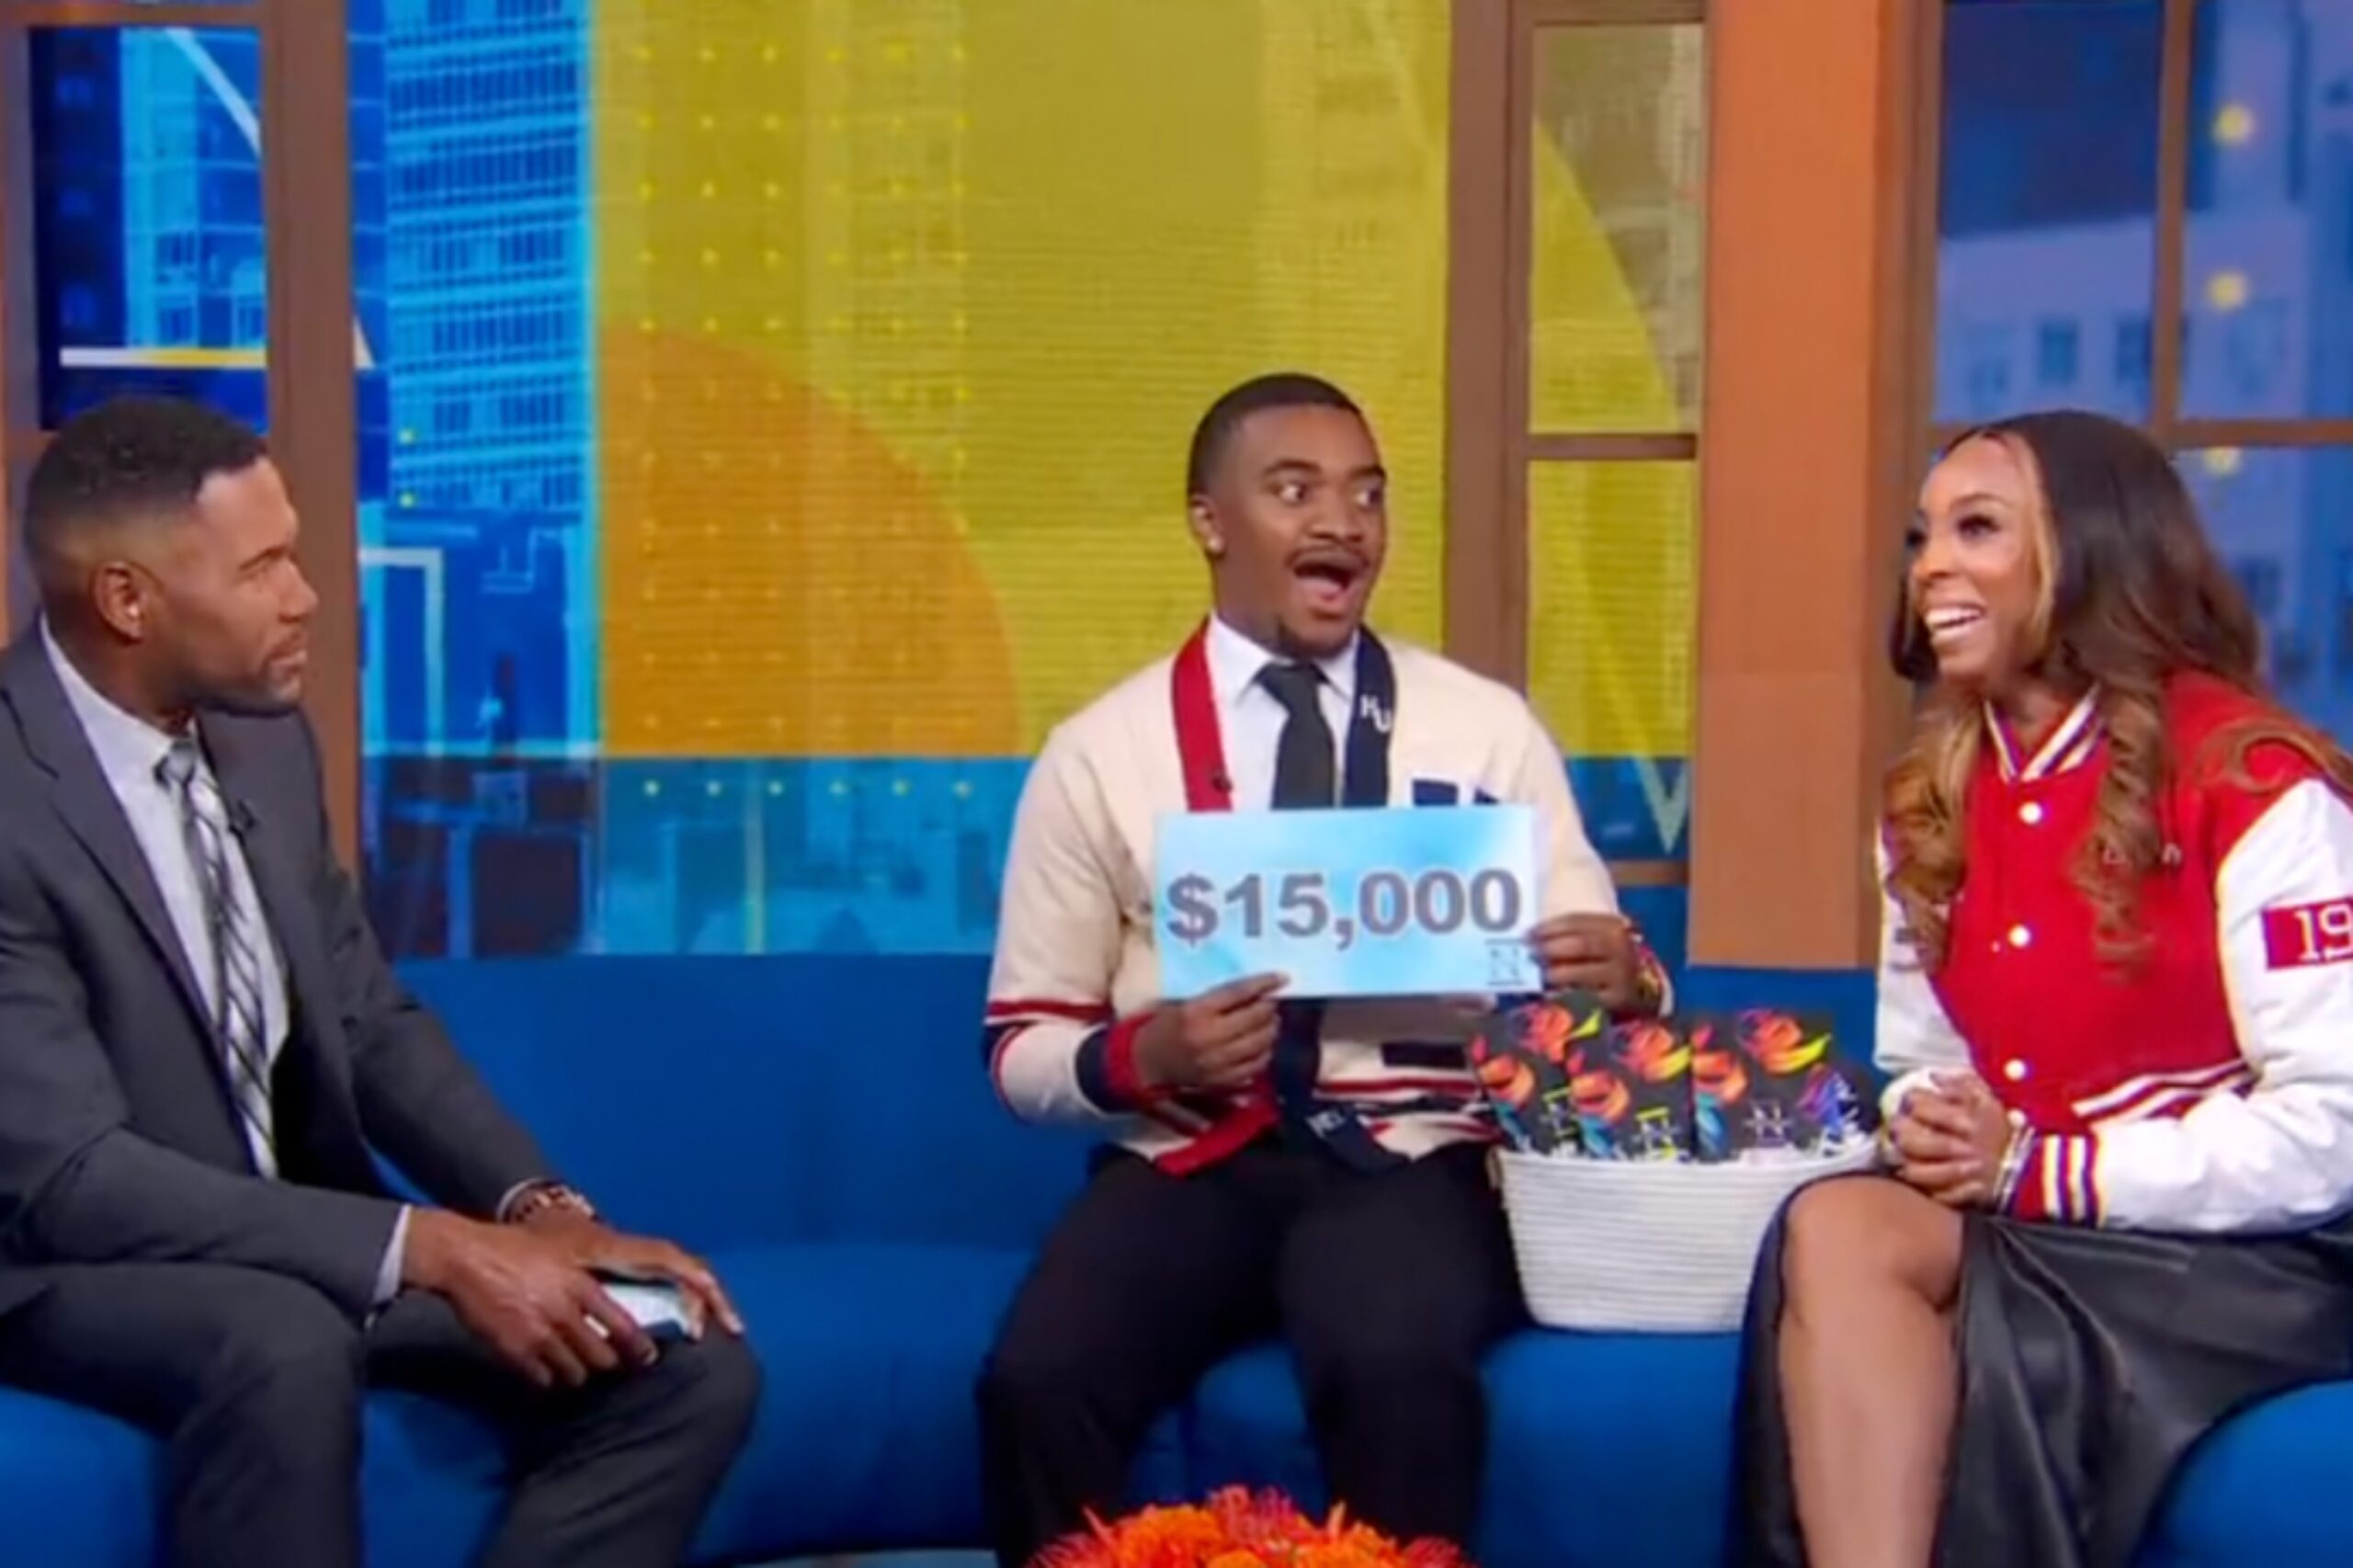 Howard Student Michael Wright surprised with 15k scholarship on Good Morning America.